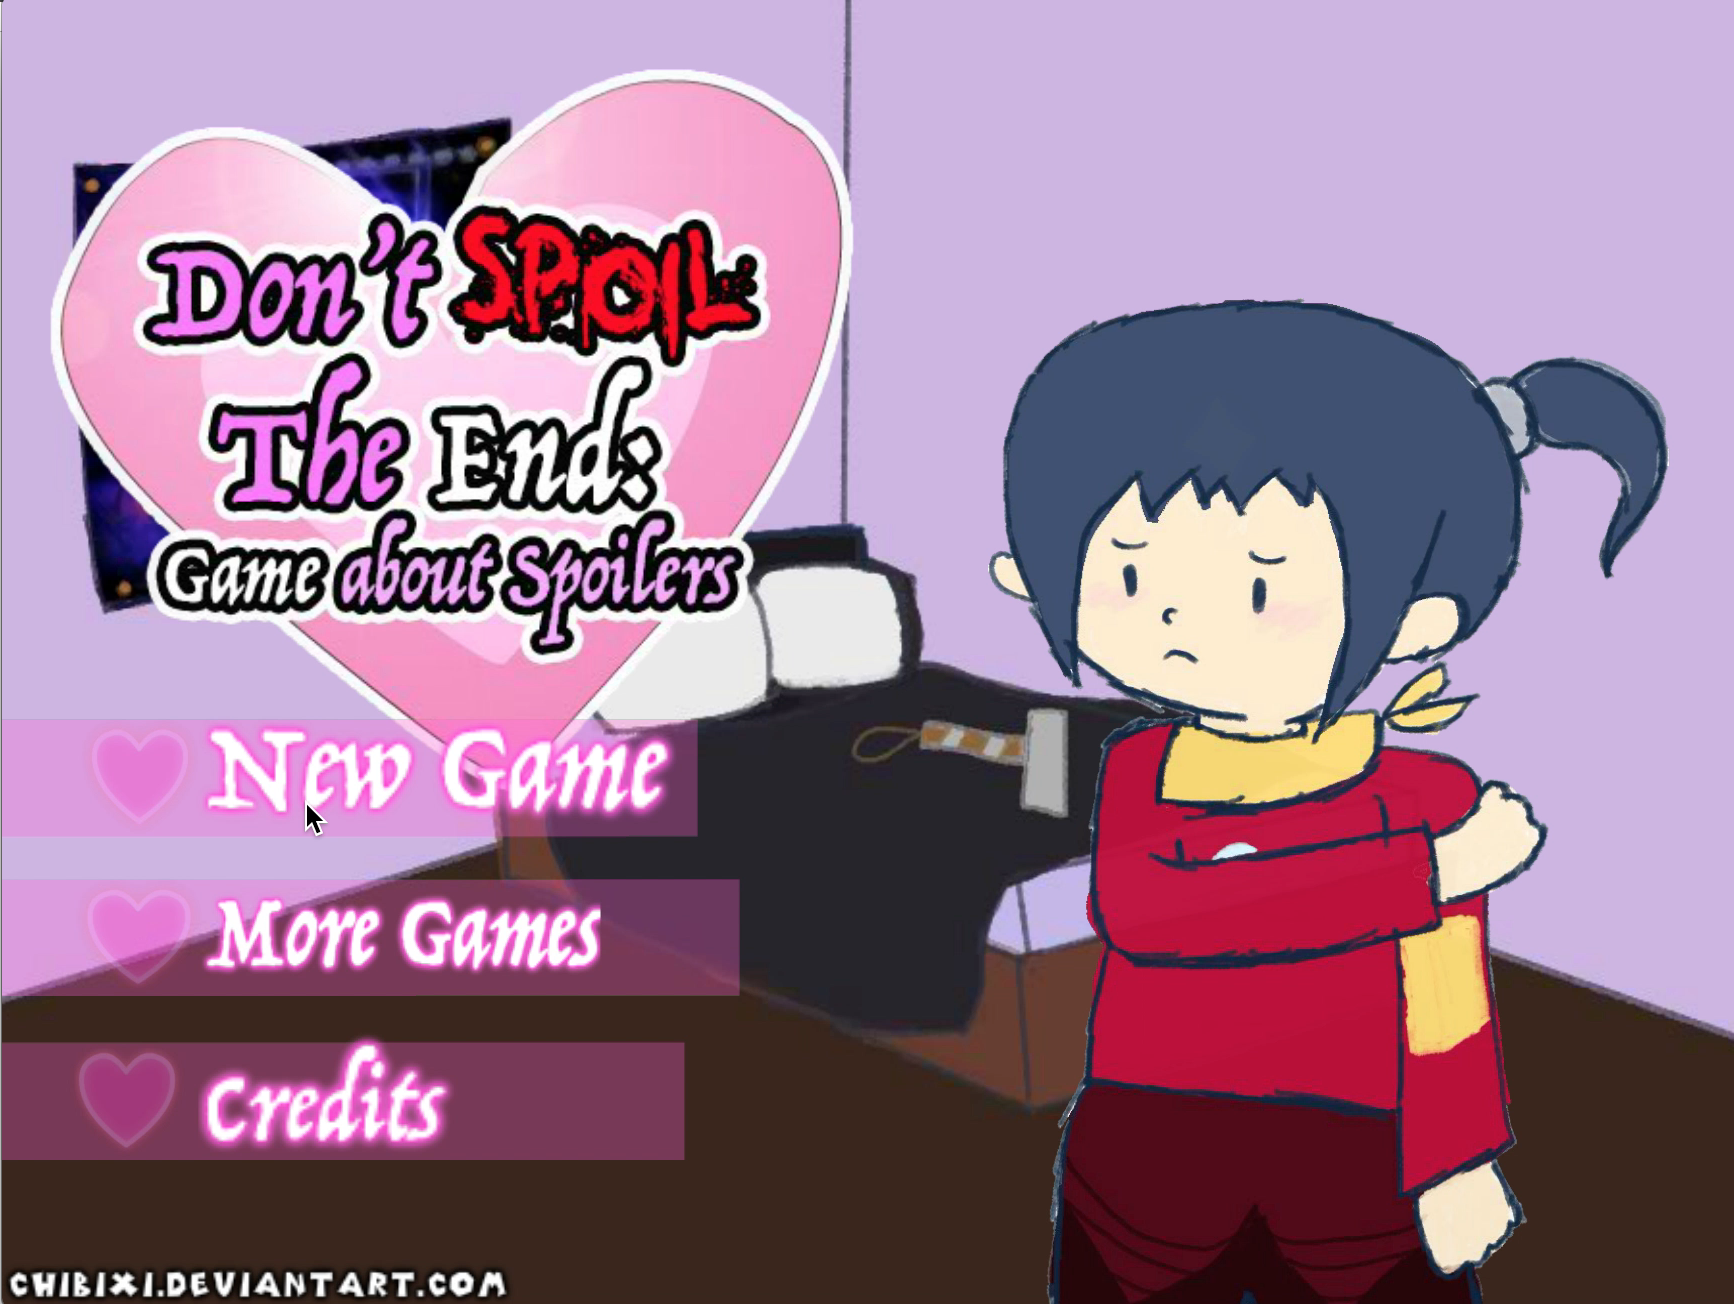 When the game ends. Don't spoil it игра. Snaggemon - a Grunt dating SIM.